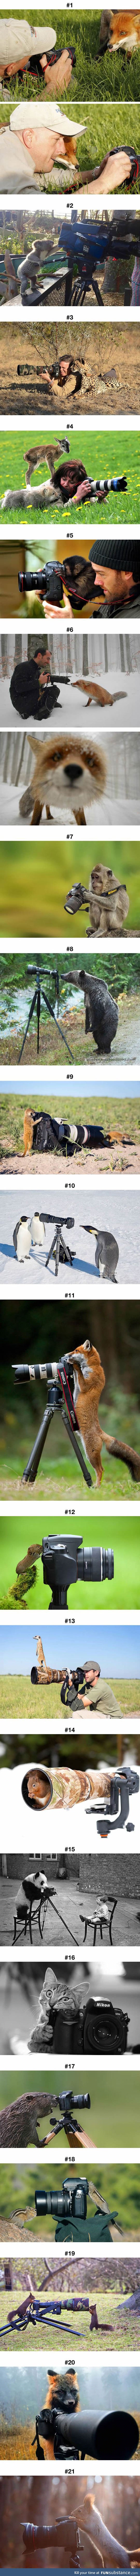 Animals That Want to Be Photographers